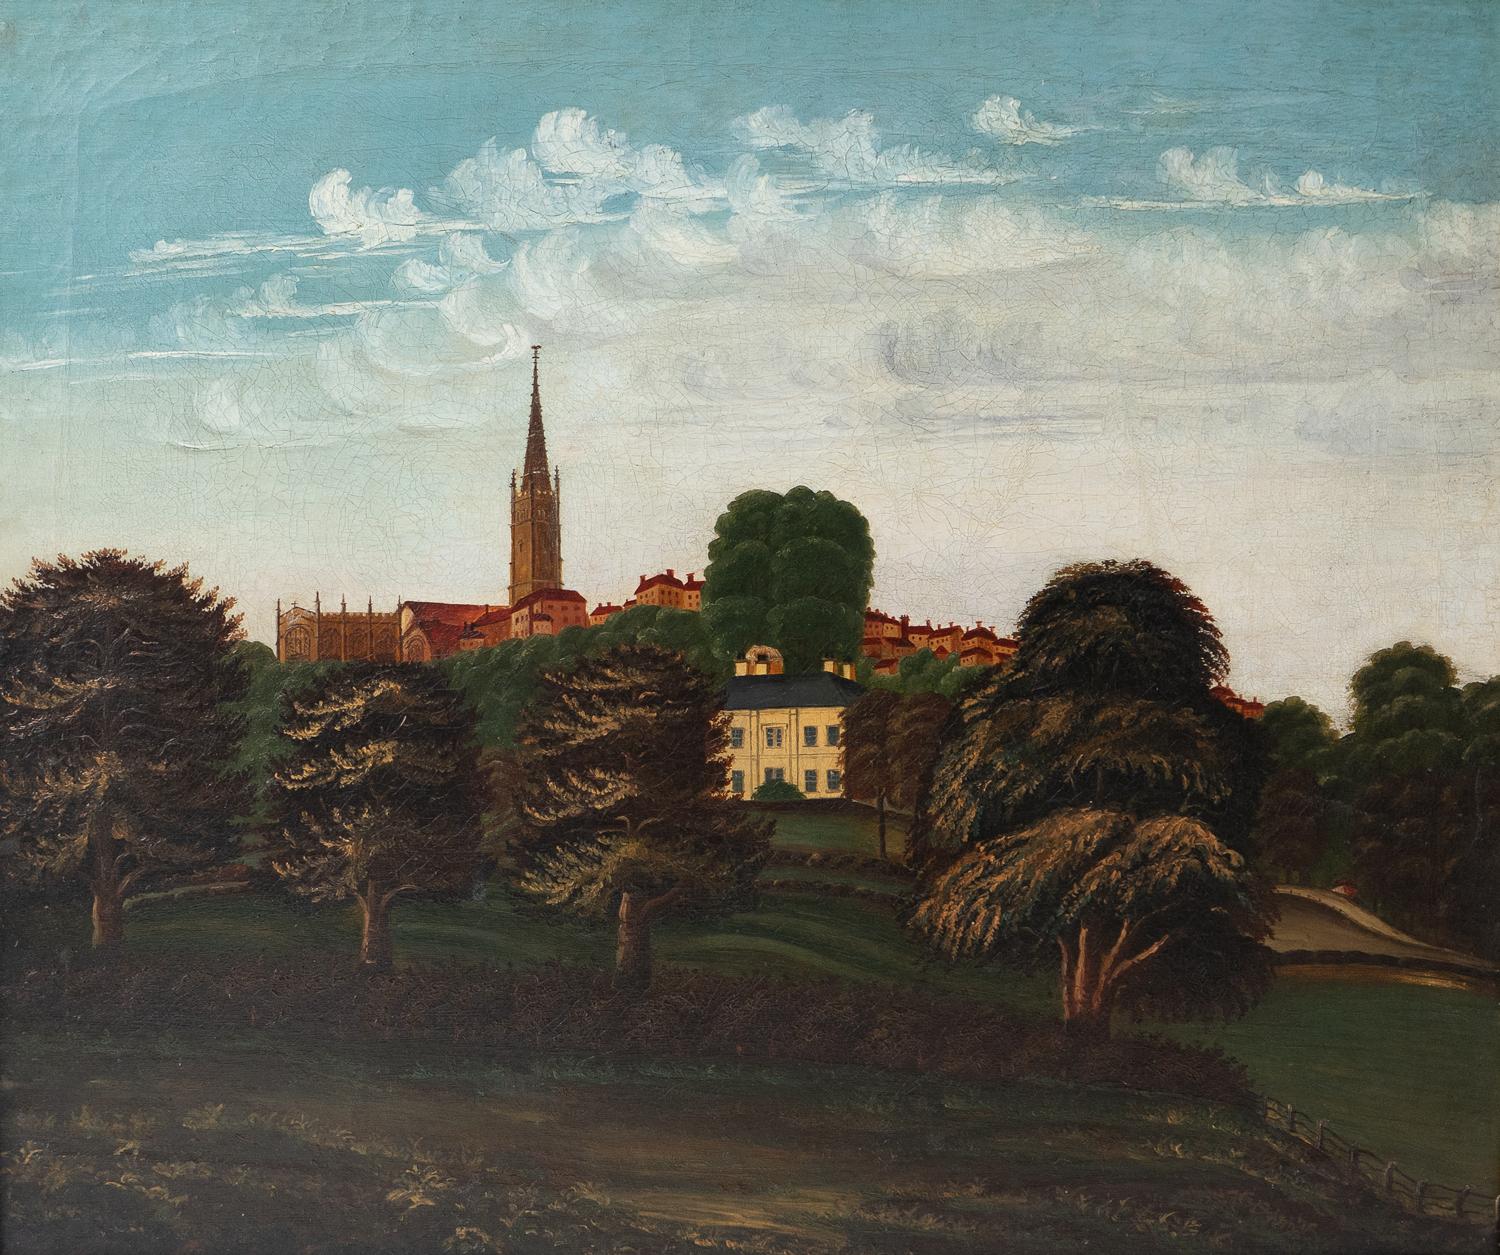 ANTIQUE ORIGINAL OIL ON CANVAS PAINTING DEPICTING A RURAL SCENE, POSSIBLY ROSS ON WYE  

A charming depiction of a country house and grounds with a town behind including a tall spire. This is believed to be Ross-on-Wye. 

Painted in a naive folk art